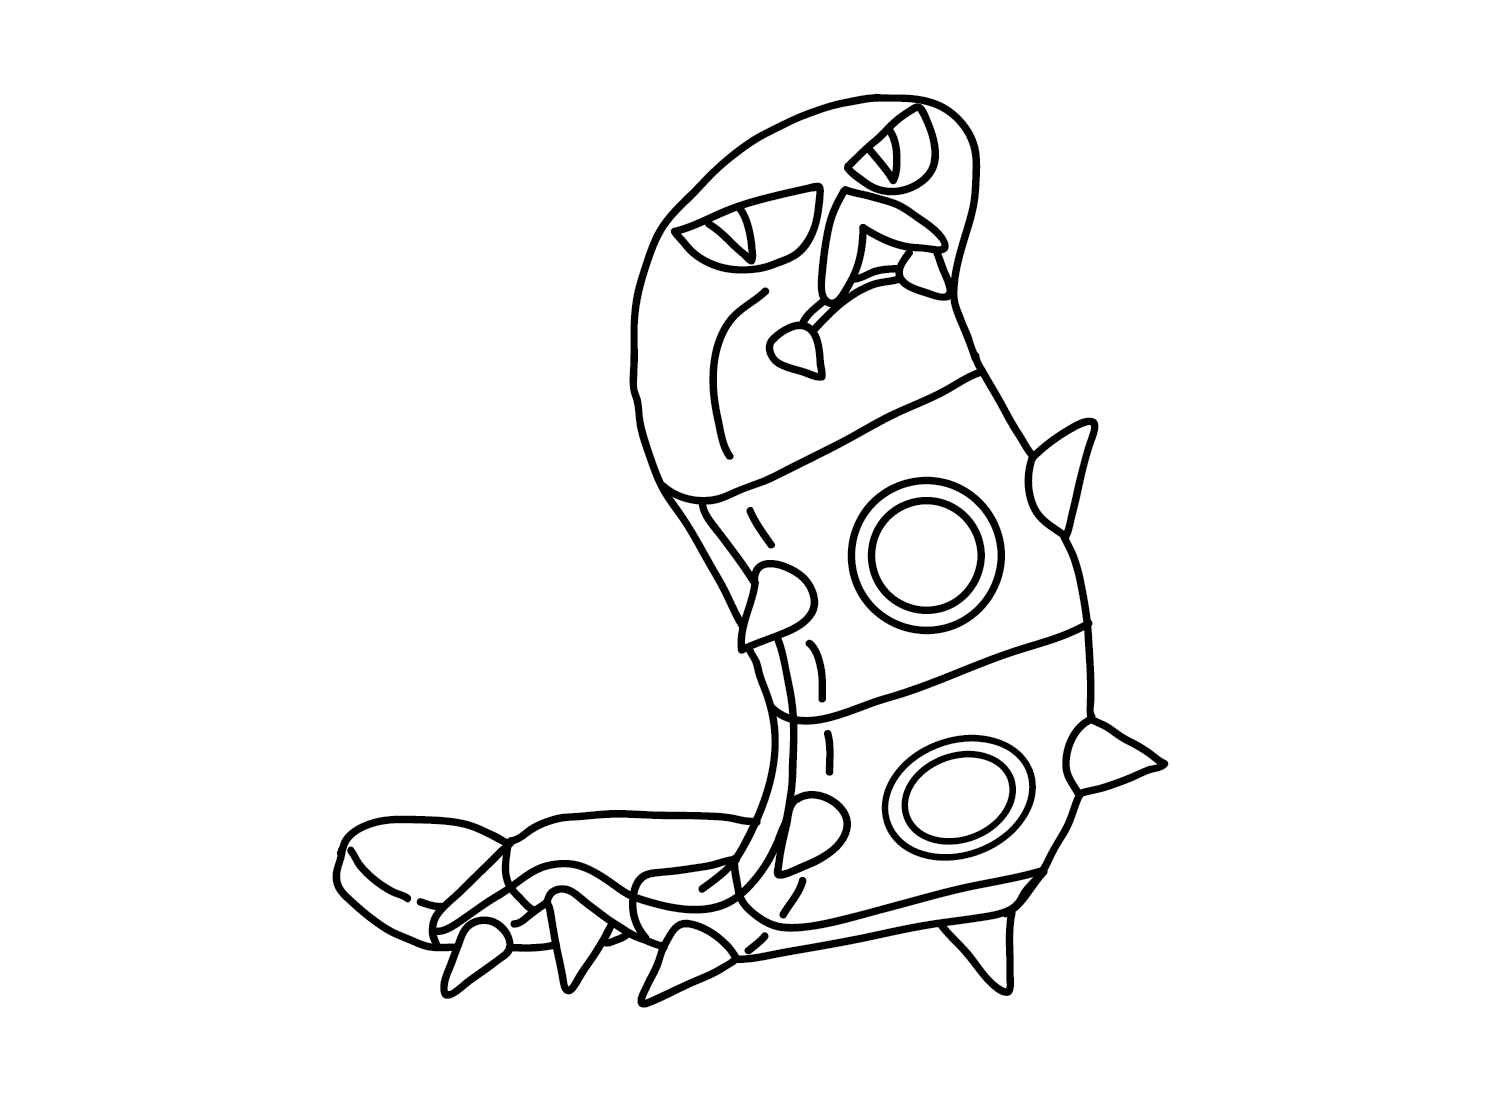 Drawing Sizzlipede Coloring Page